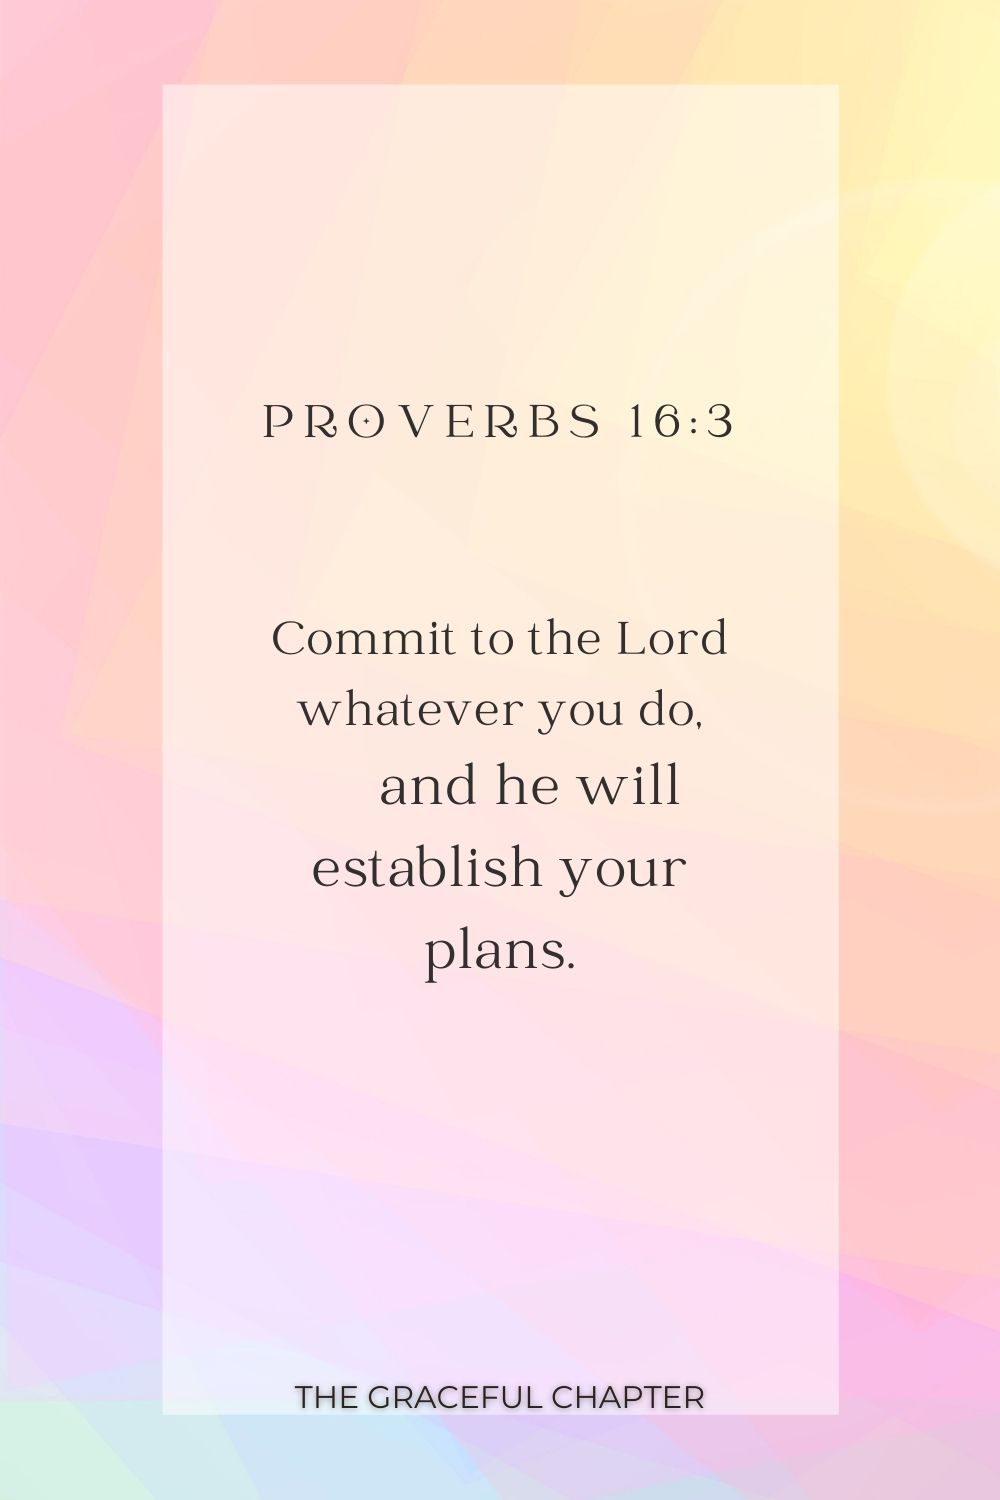 Commit to the Lord whatever you do,     and he will establish your plans. Proverbs 16:3